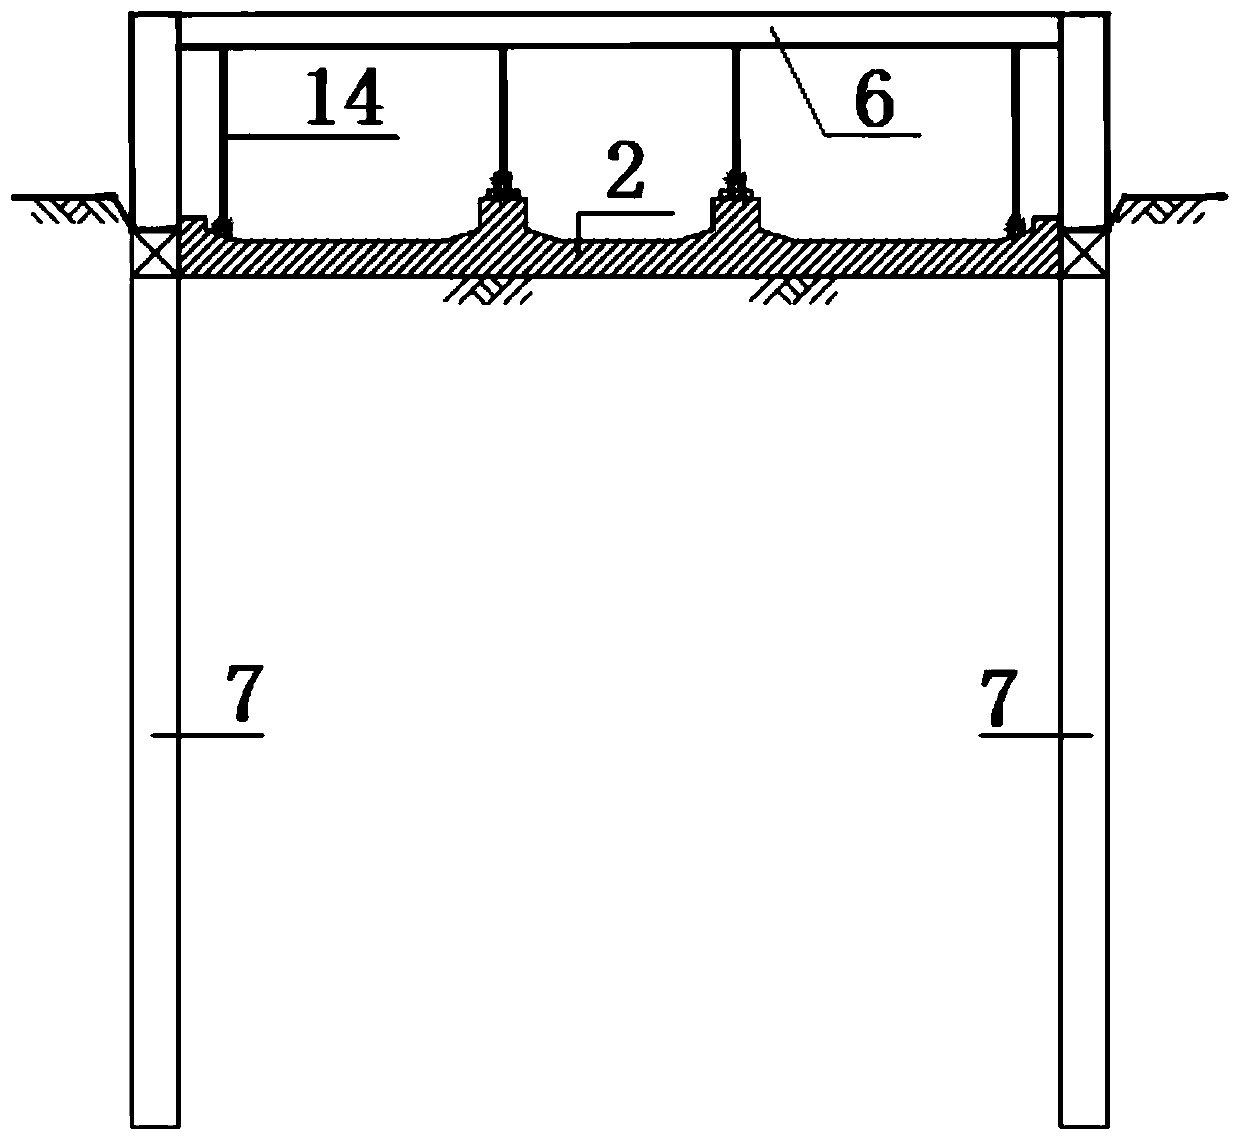 A method for the integration of prefabricated main structure and support structure in open-cut engineering